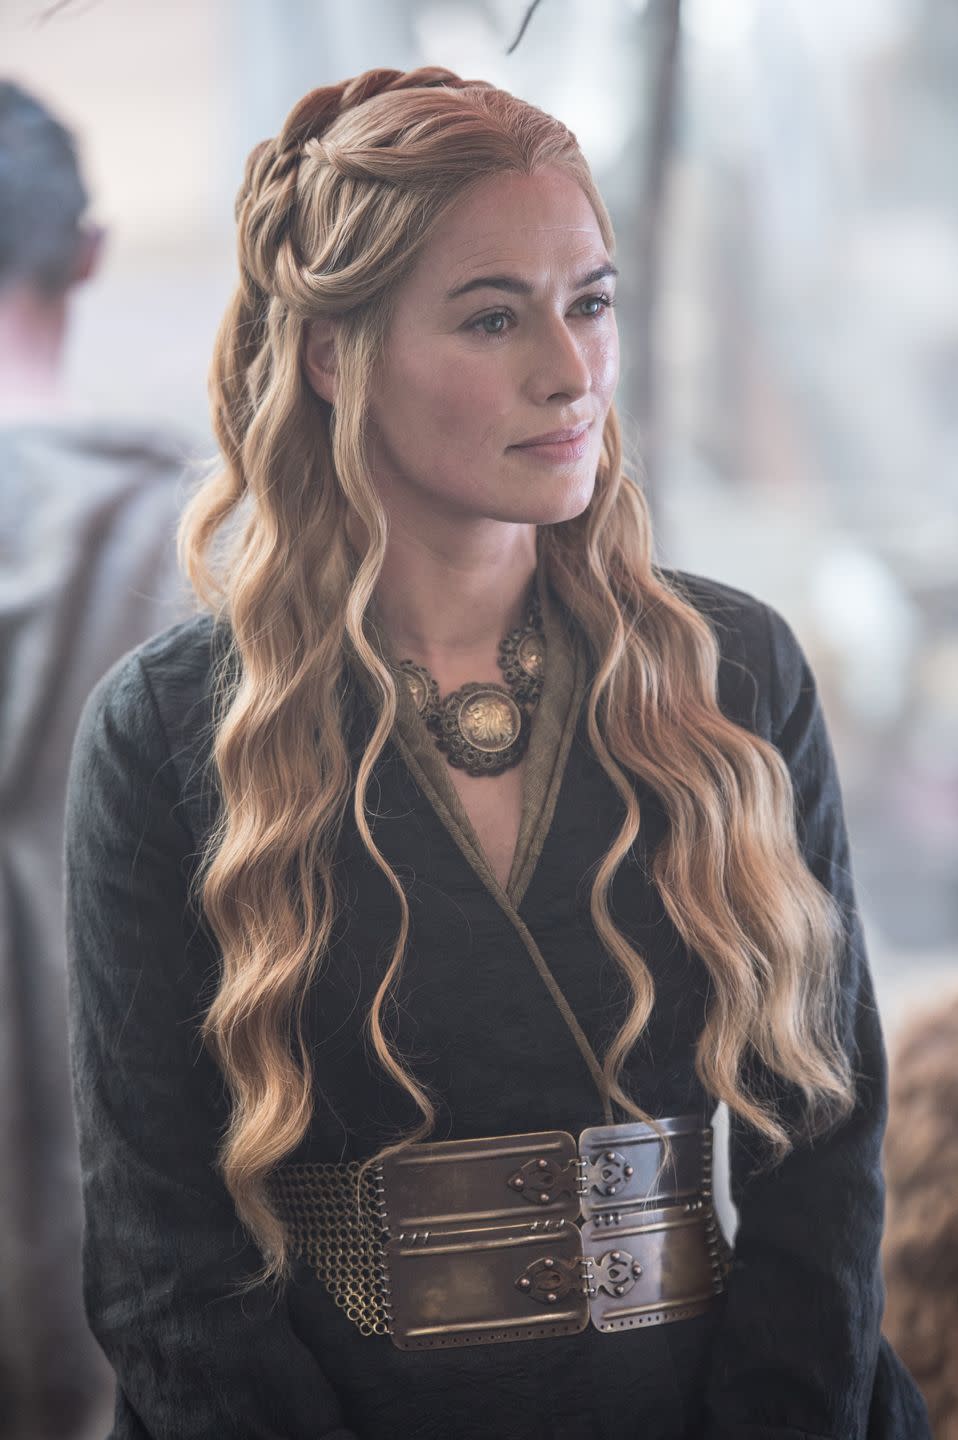 lena headey as cersei lannister, game of thrones